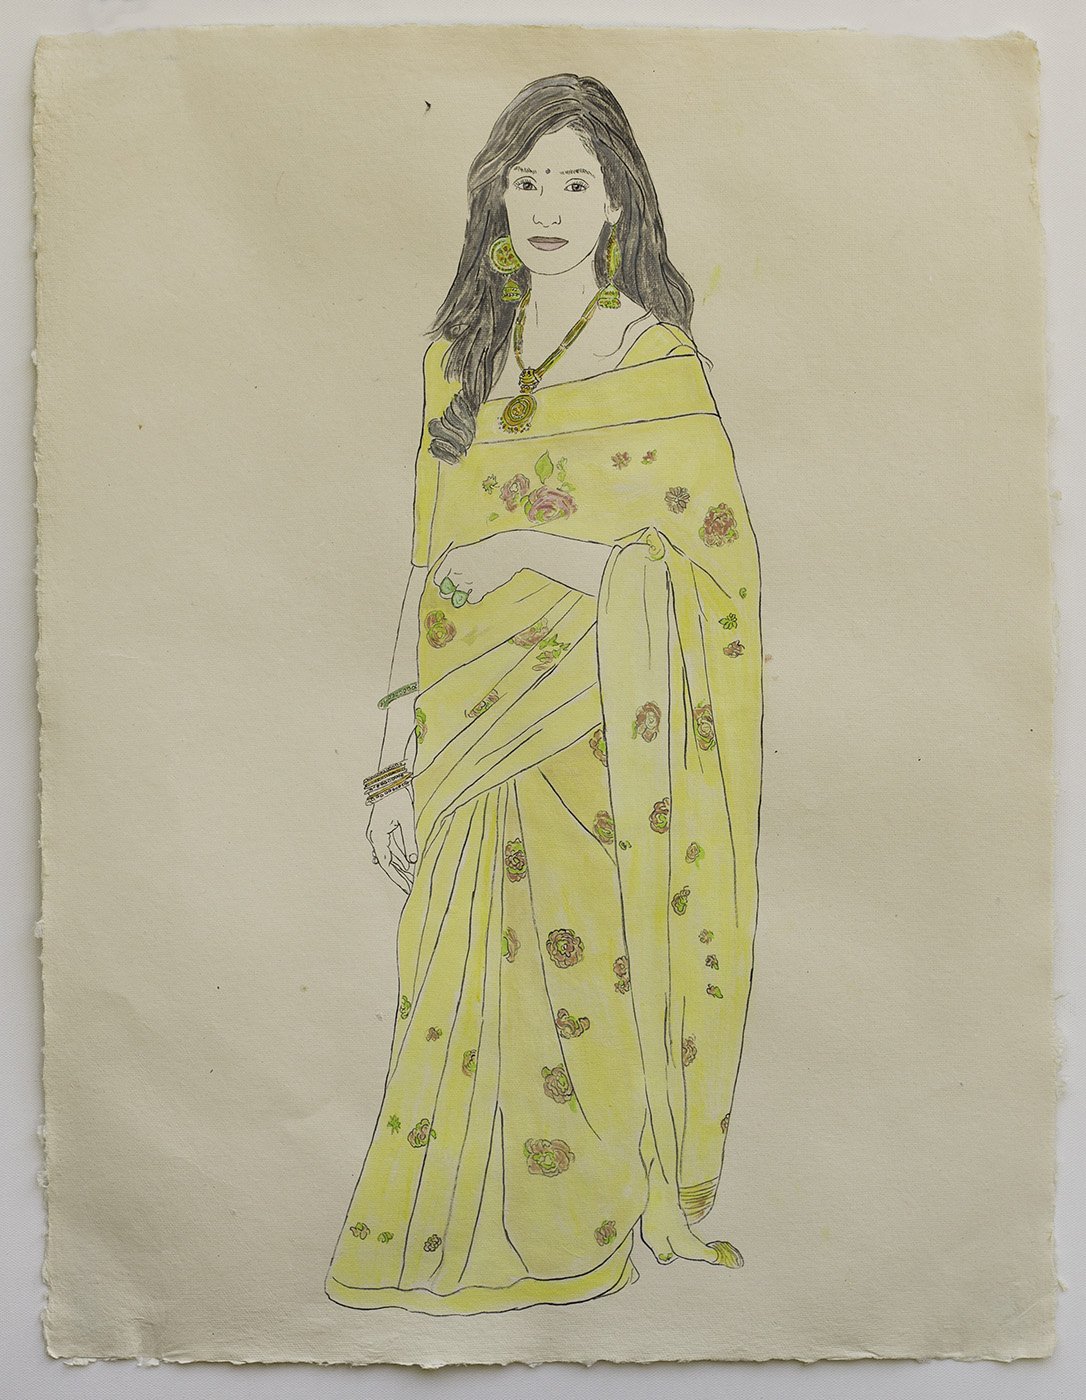   Available    Woman in Yellow Sari   2021, ink, watercolor, and gouache on handmade paper, 25” x 19” 